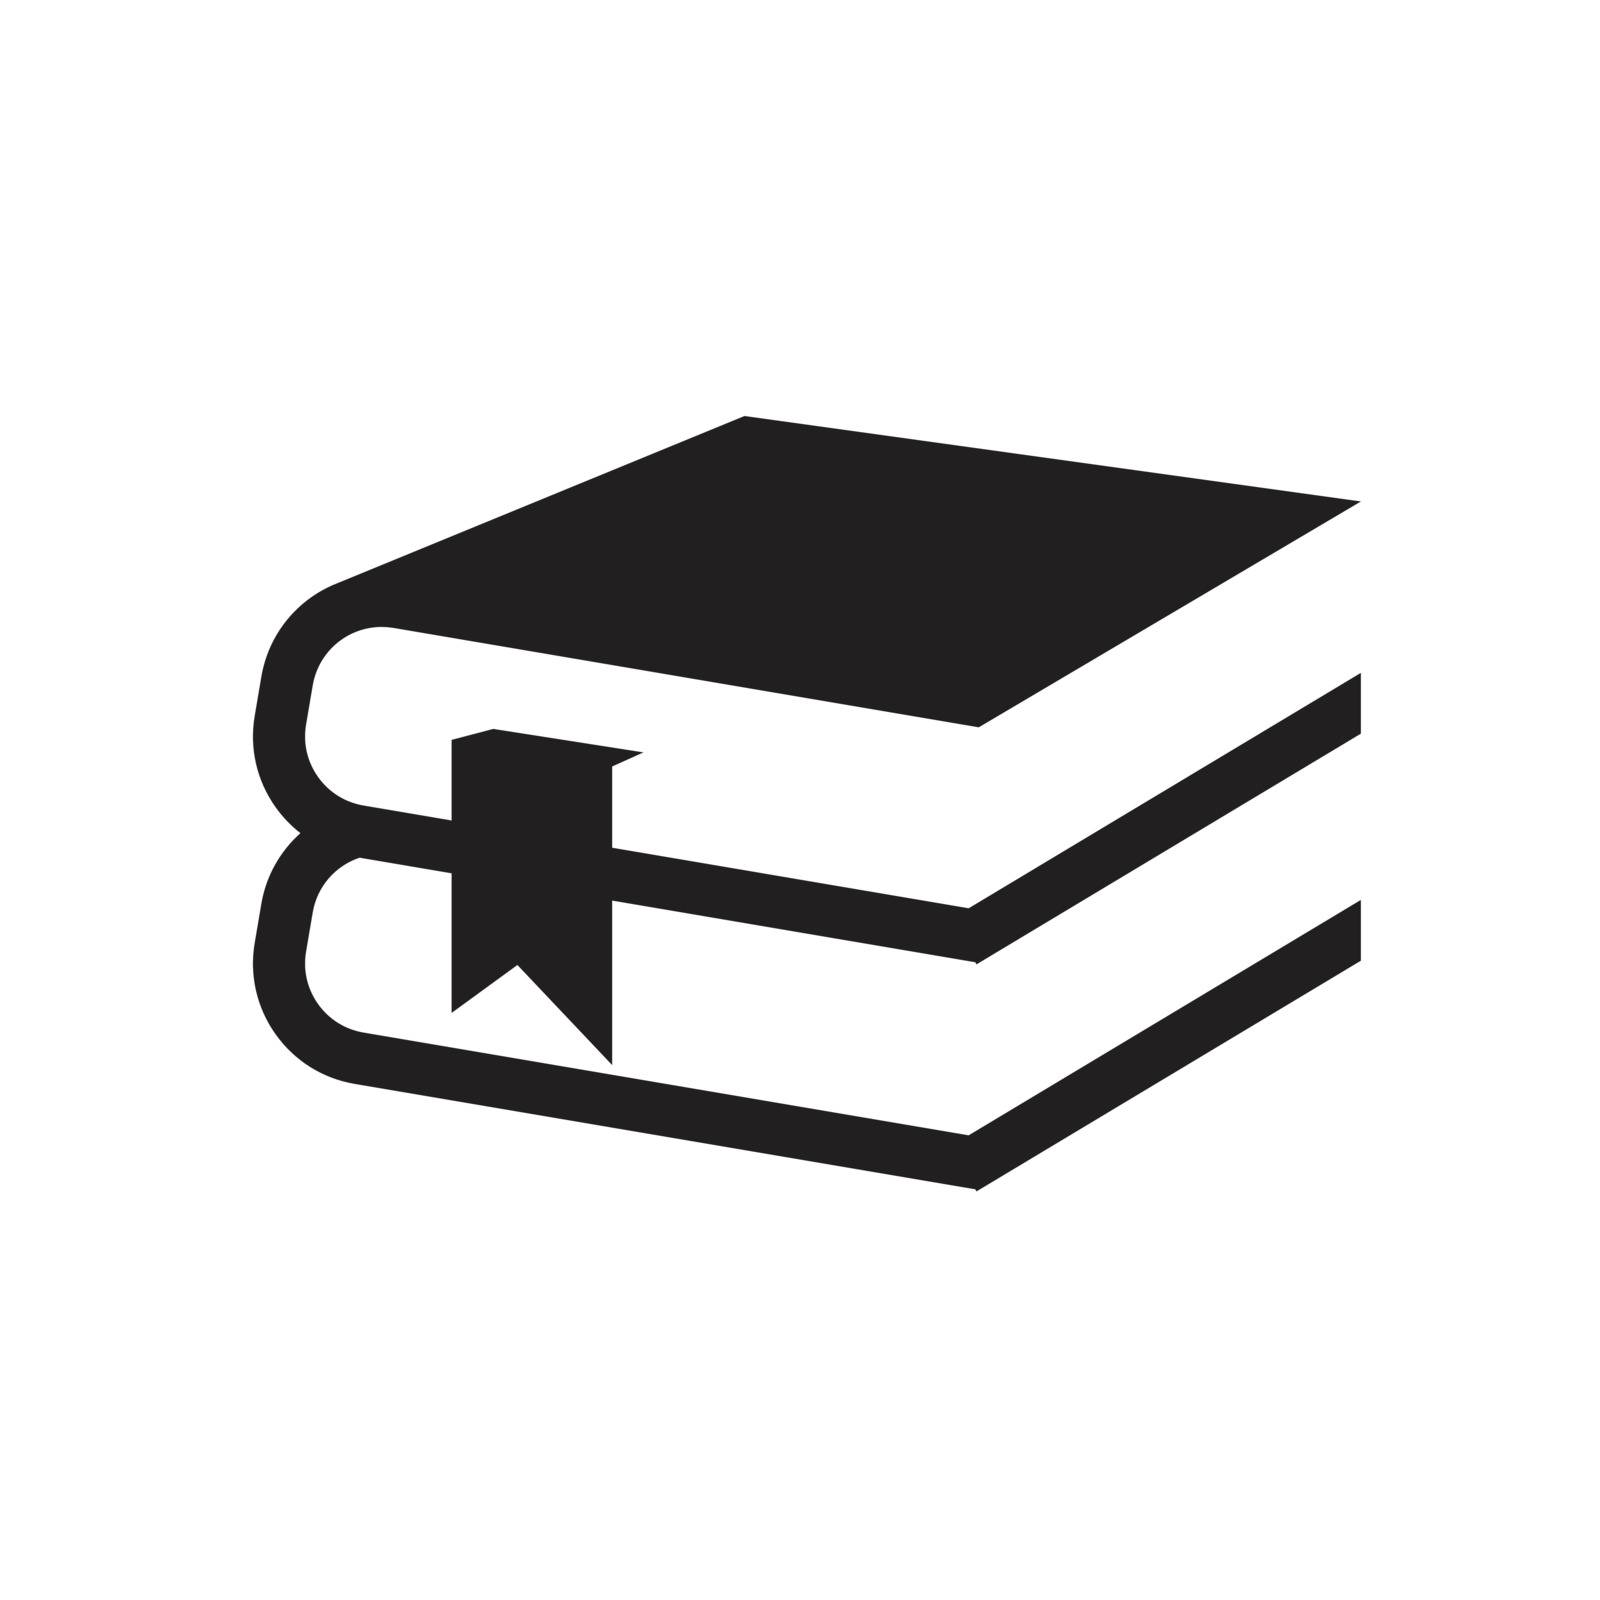 Simple set of books icon by iconmama